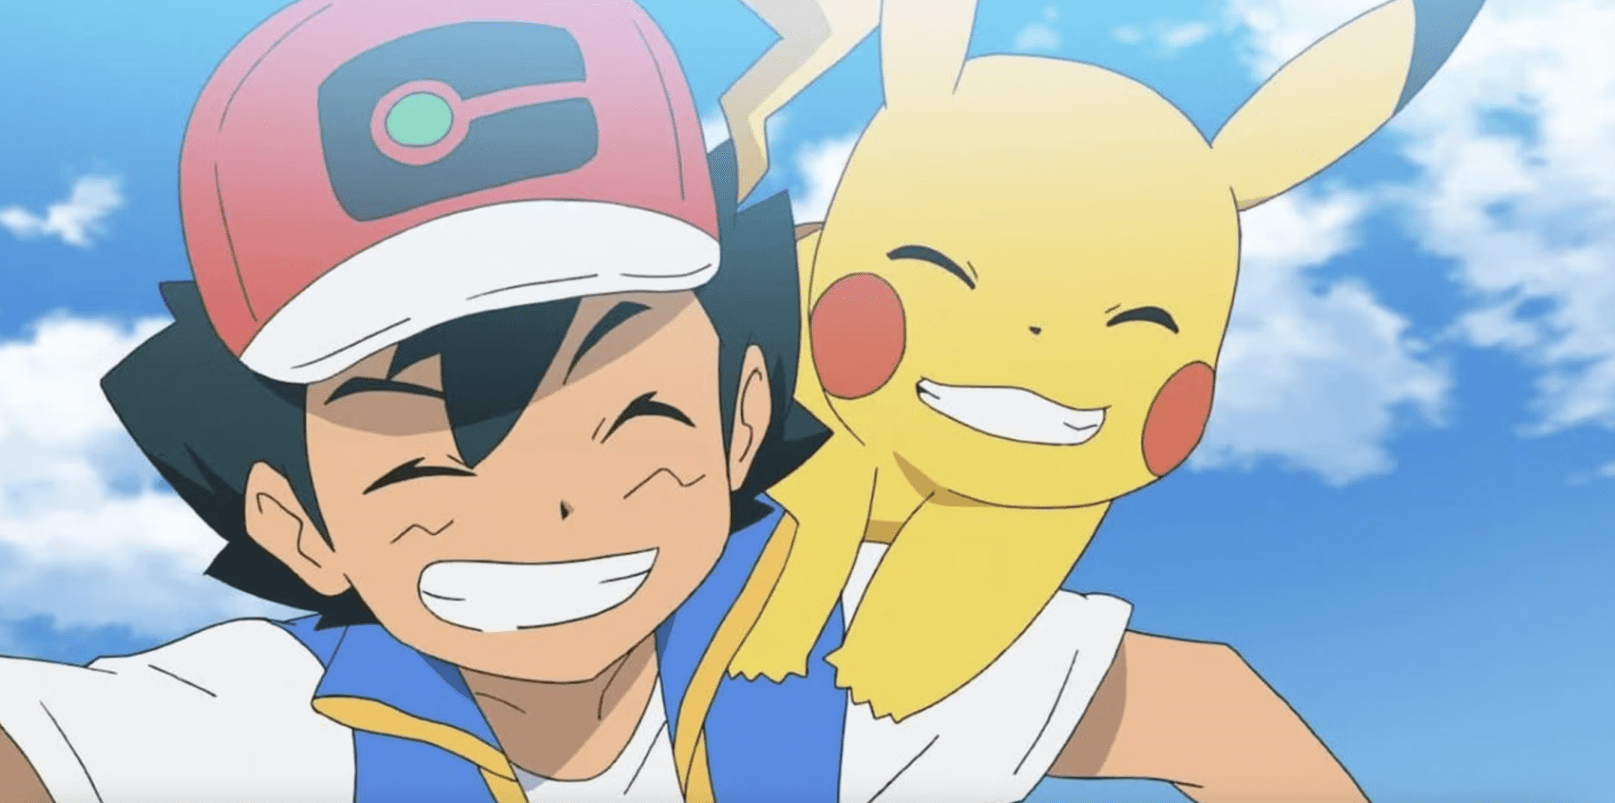 Ash and Pikachu end 'Pokémon' journey after 26 years